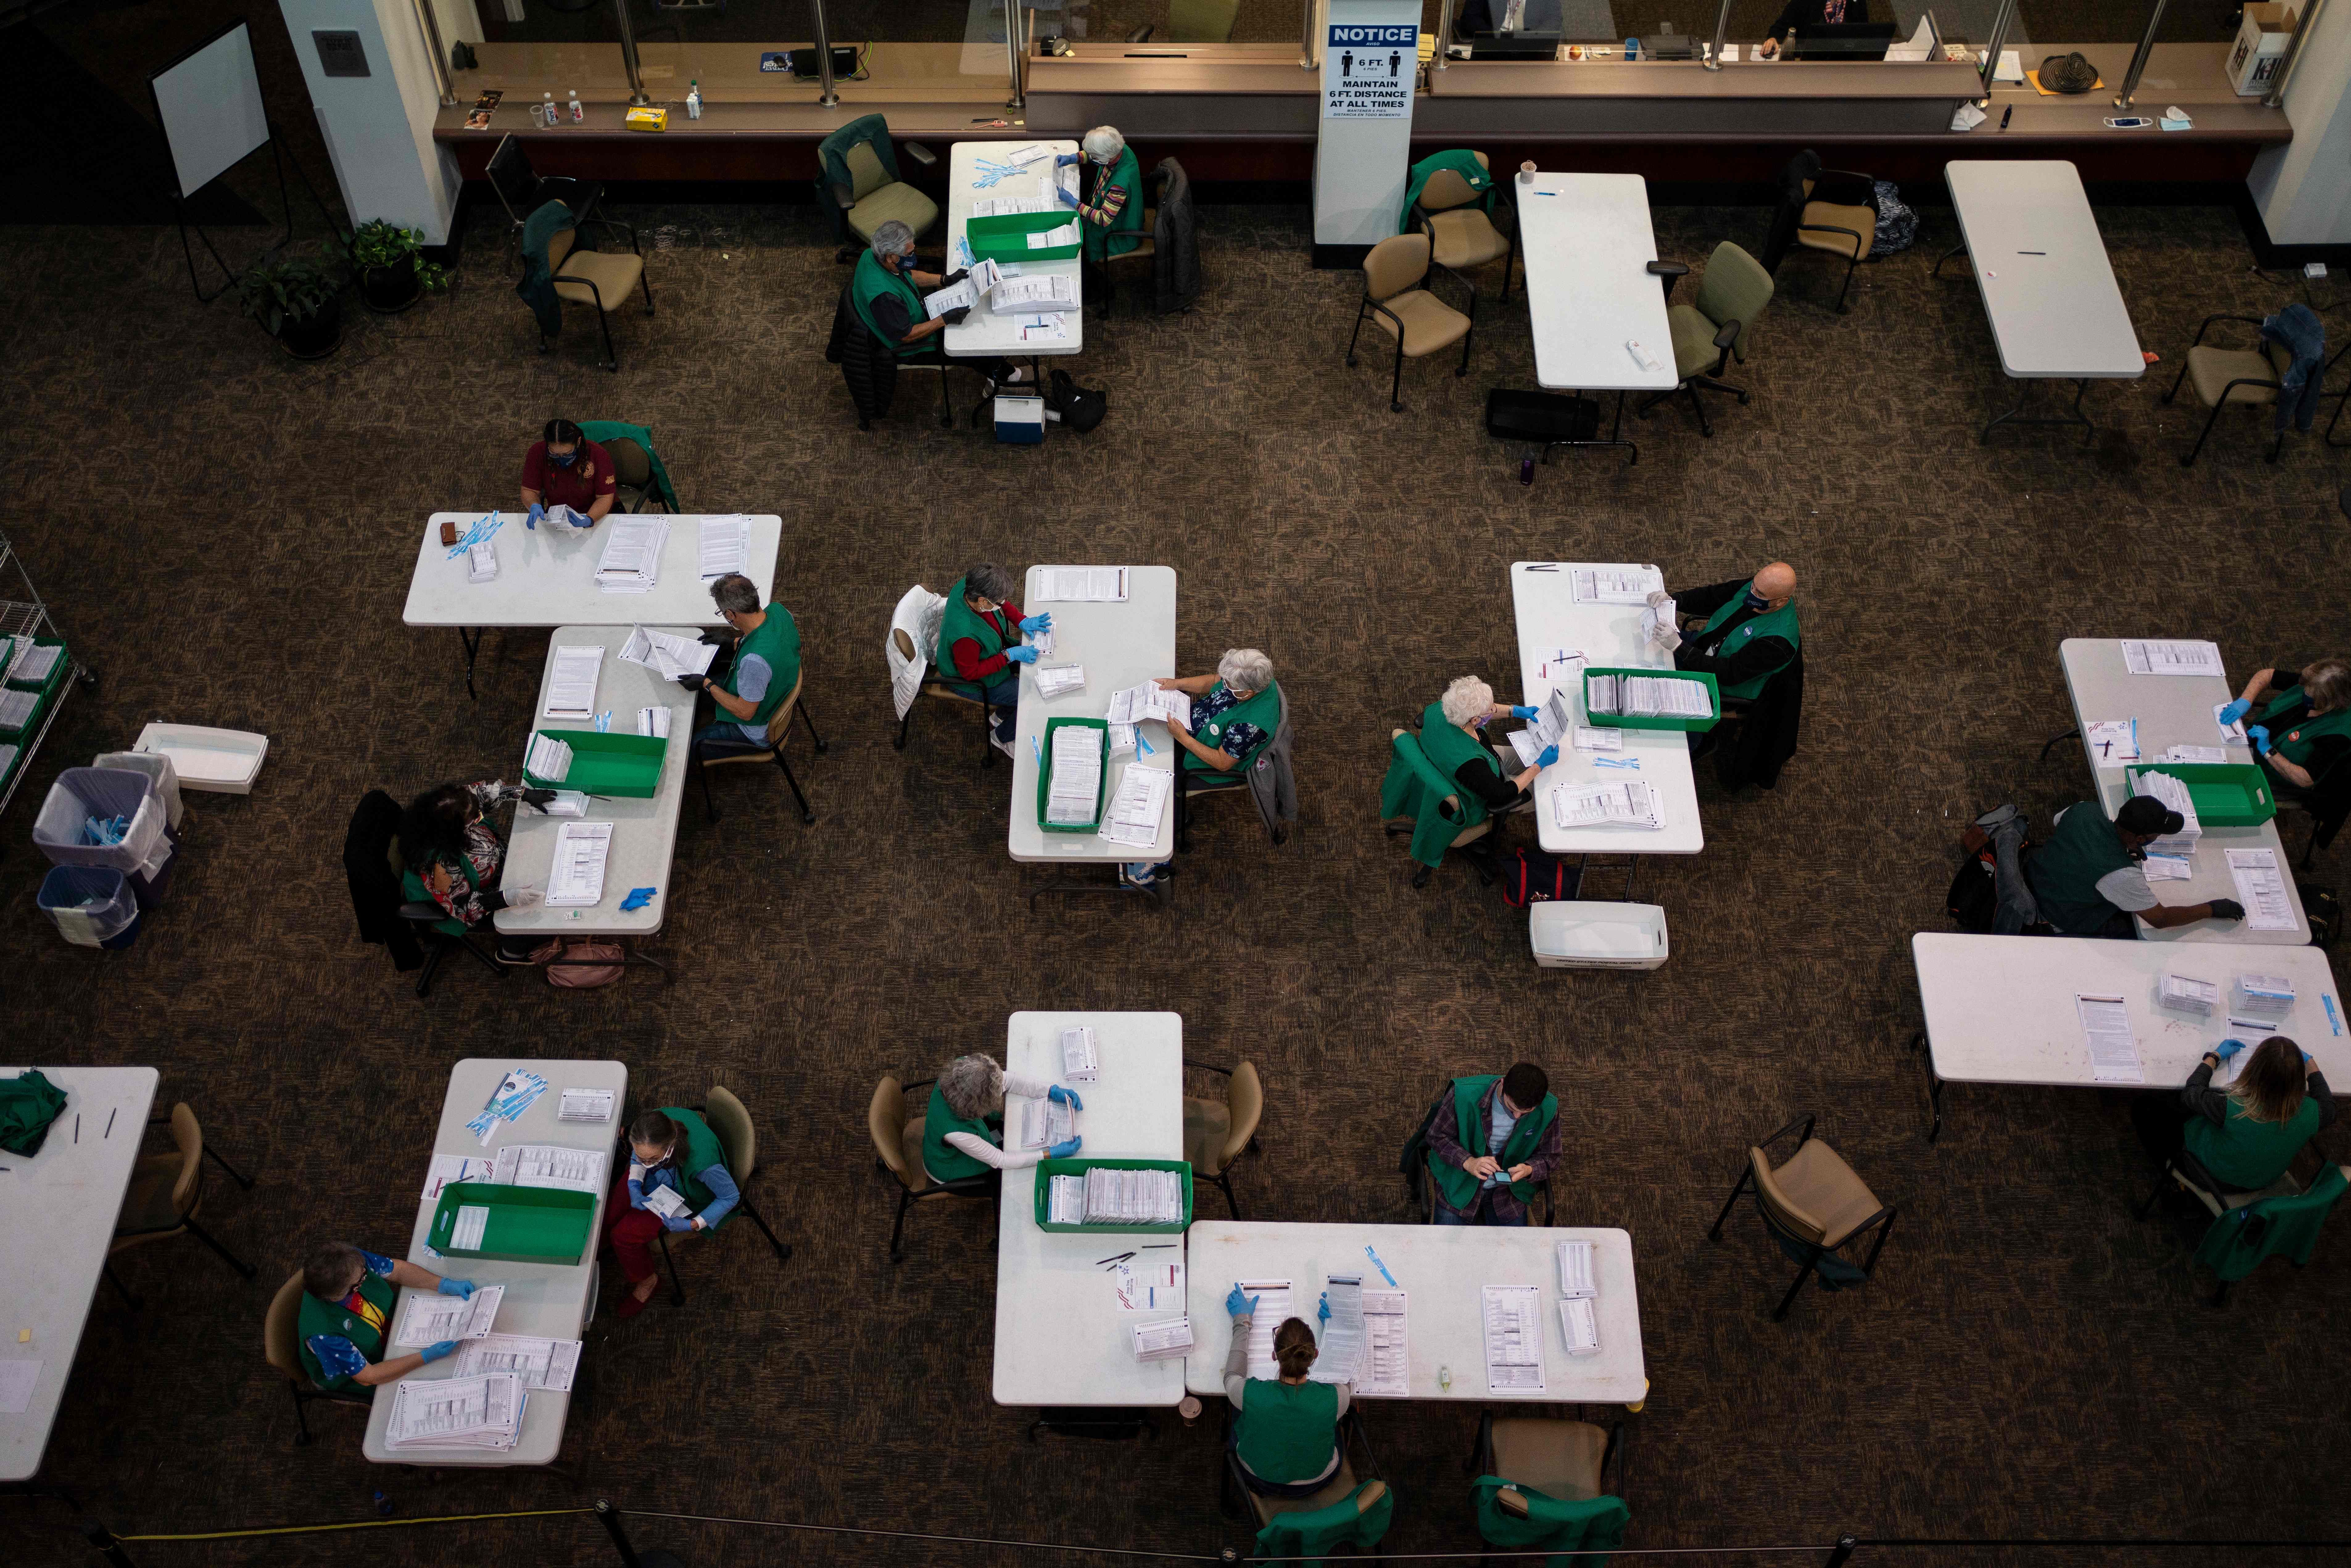 Election judges verify and count ballots at the Denver Elections Division building on election day on November 3, 2020 in Denver, Colorado. 